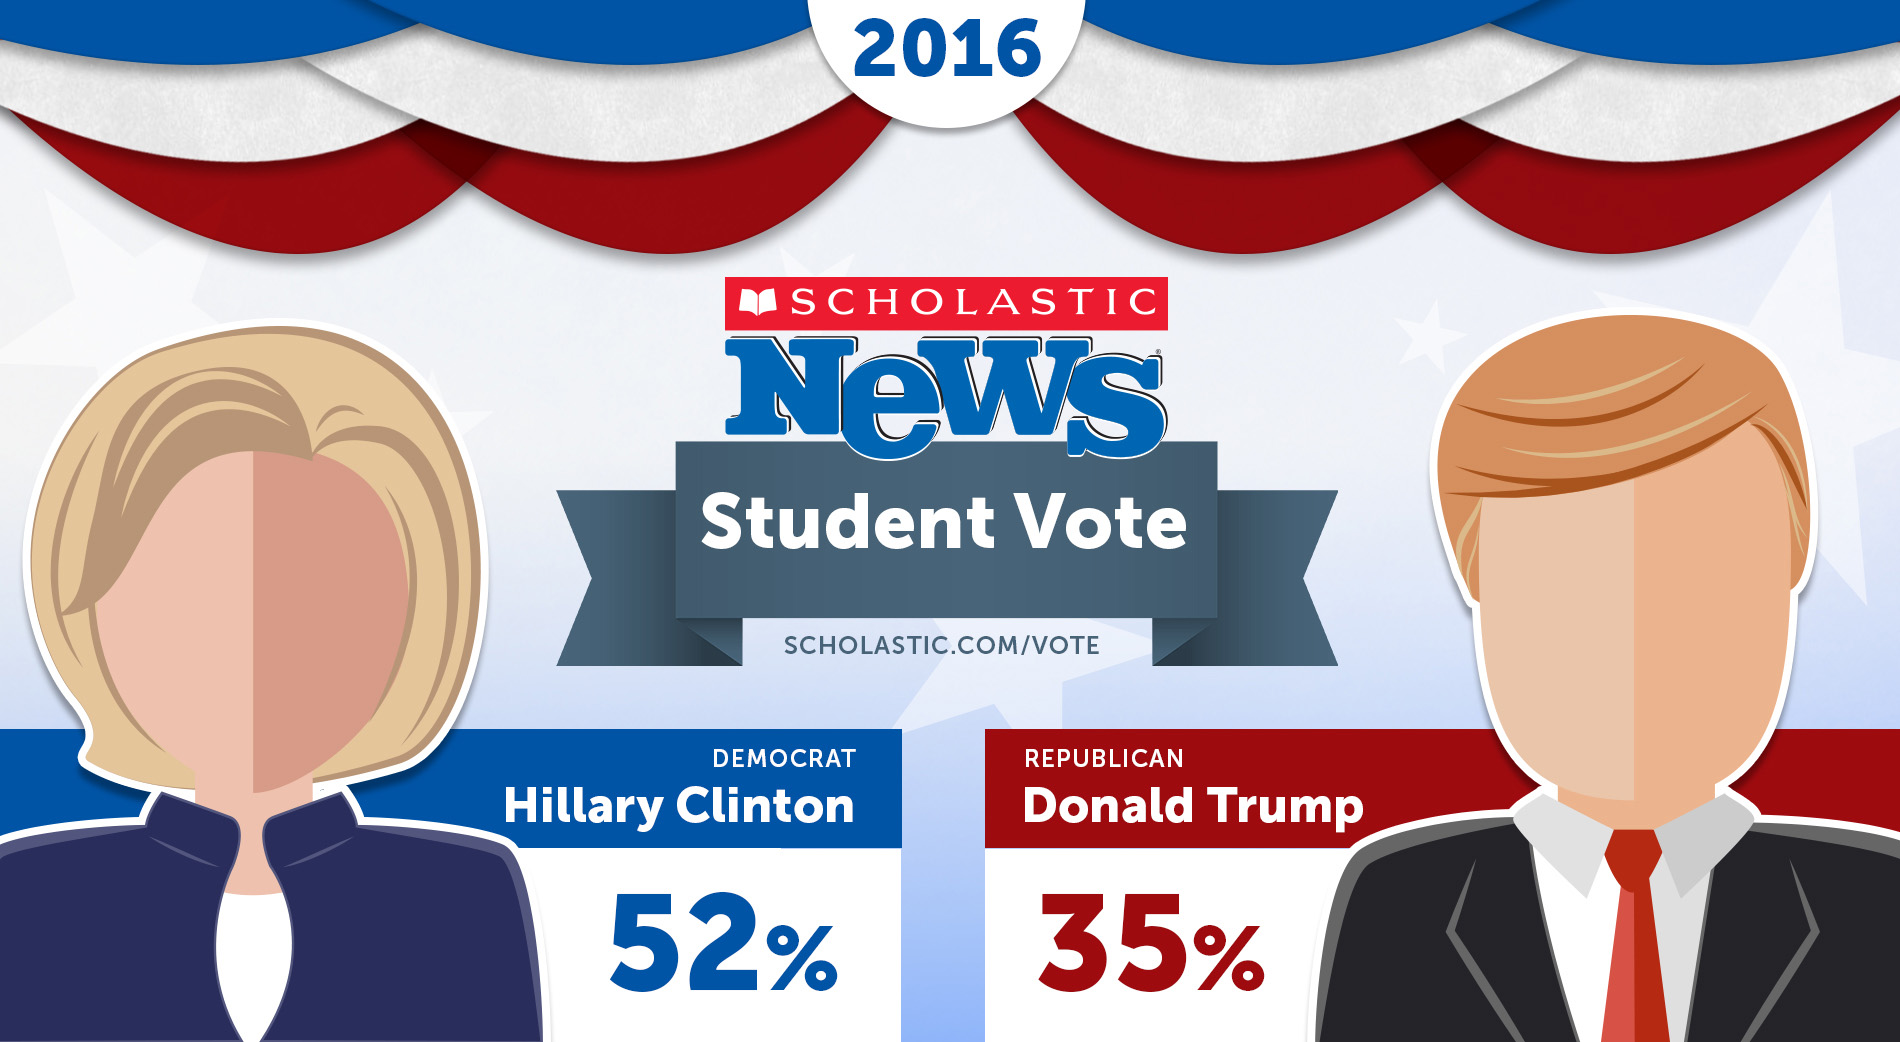 Democratic presidential candidate Hillary Clinton has been named the winner of the 2016 Scholastic News Student Vote with 52% of the student vote, while Republican candidate Donald Trump received 35%. (Credit: Scholastic)